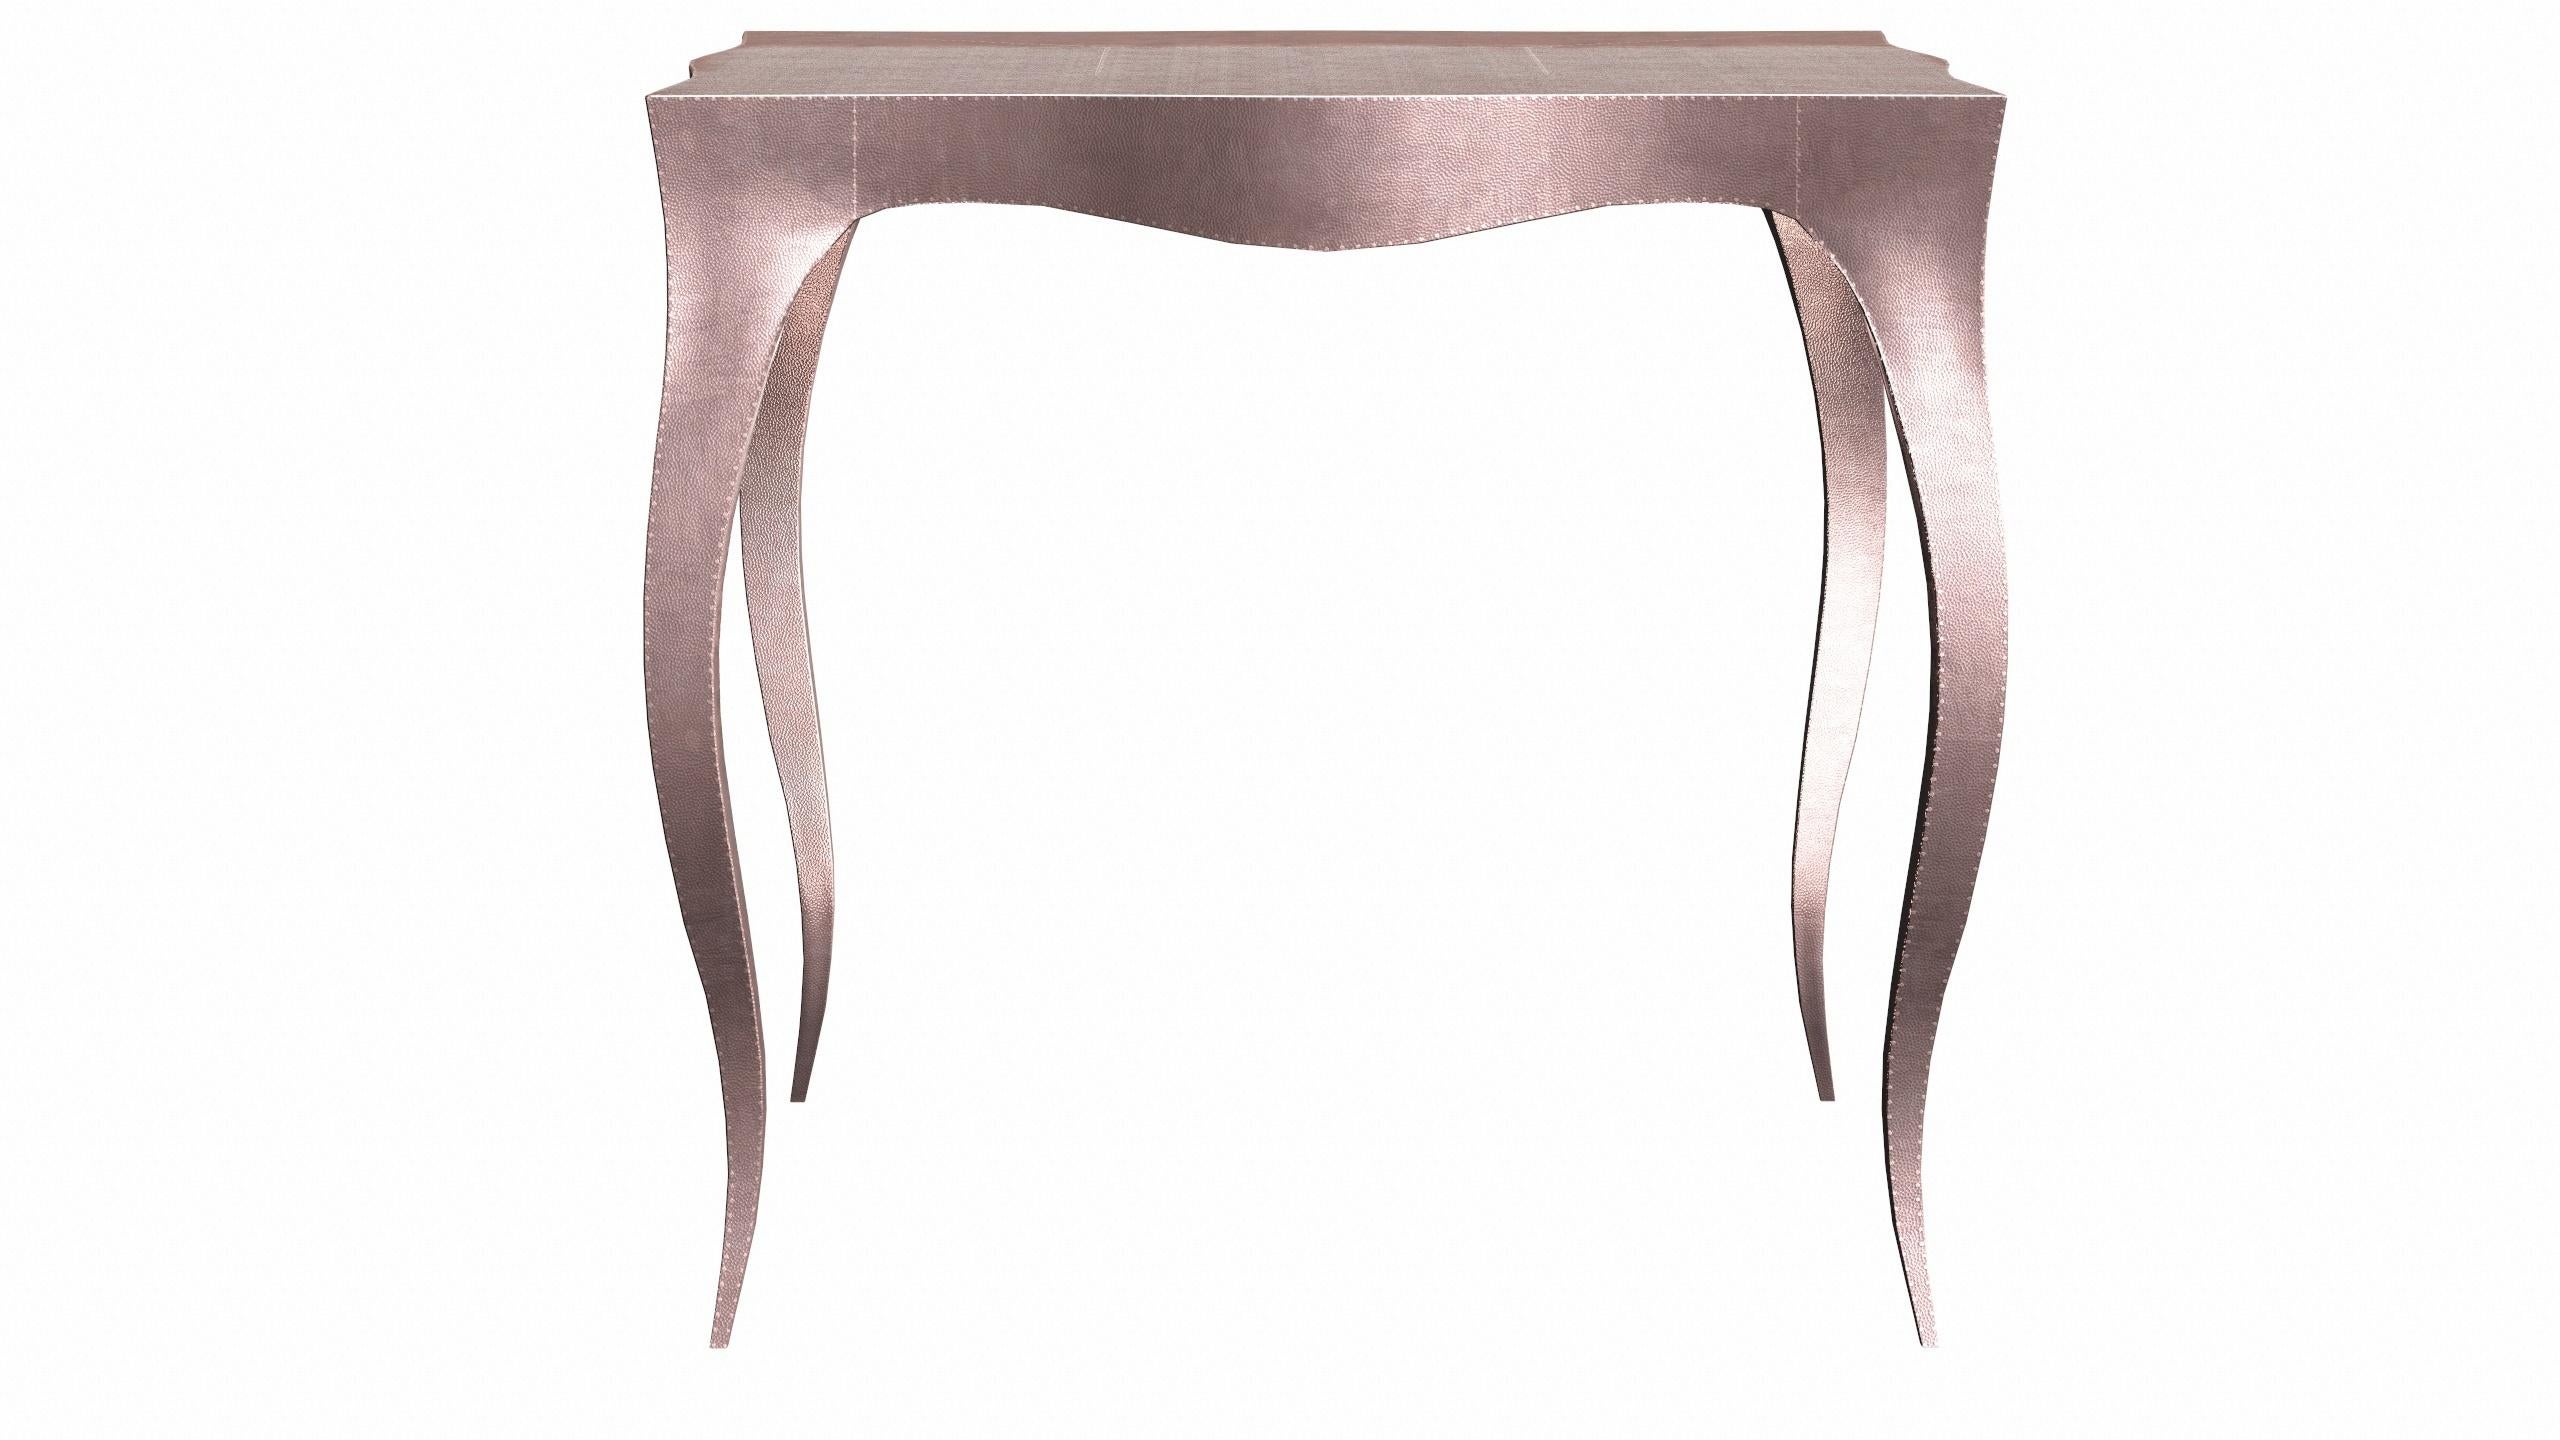 American Louise Art Nouveau Vanities Tables Mid. Hammered Copper by Paul Mathieu For Sale